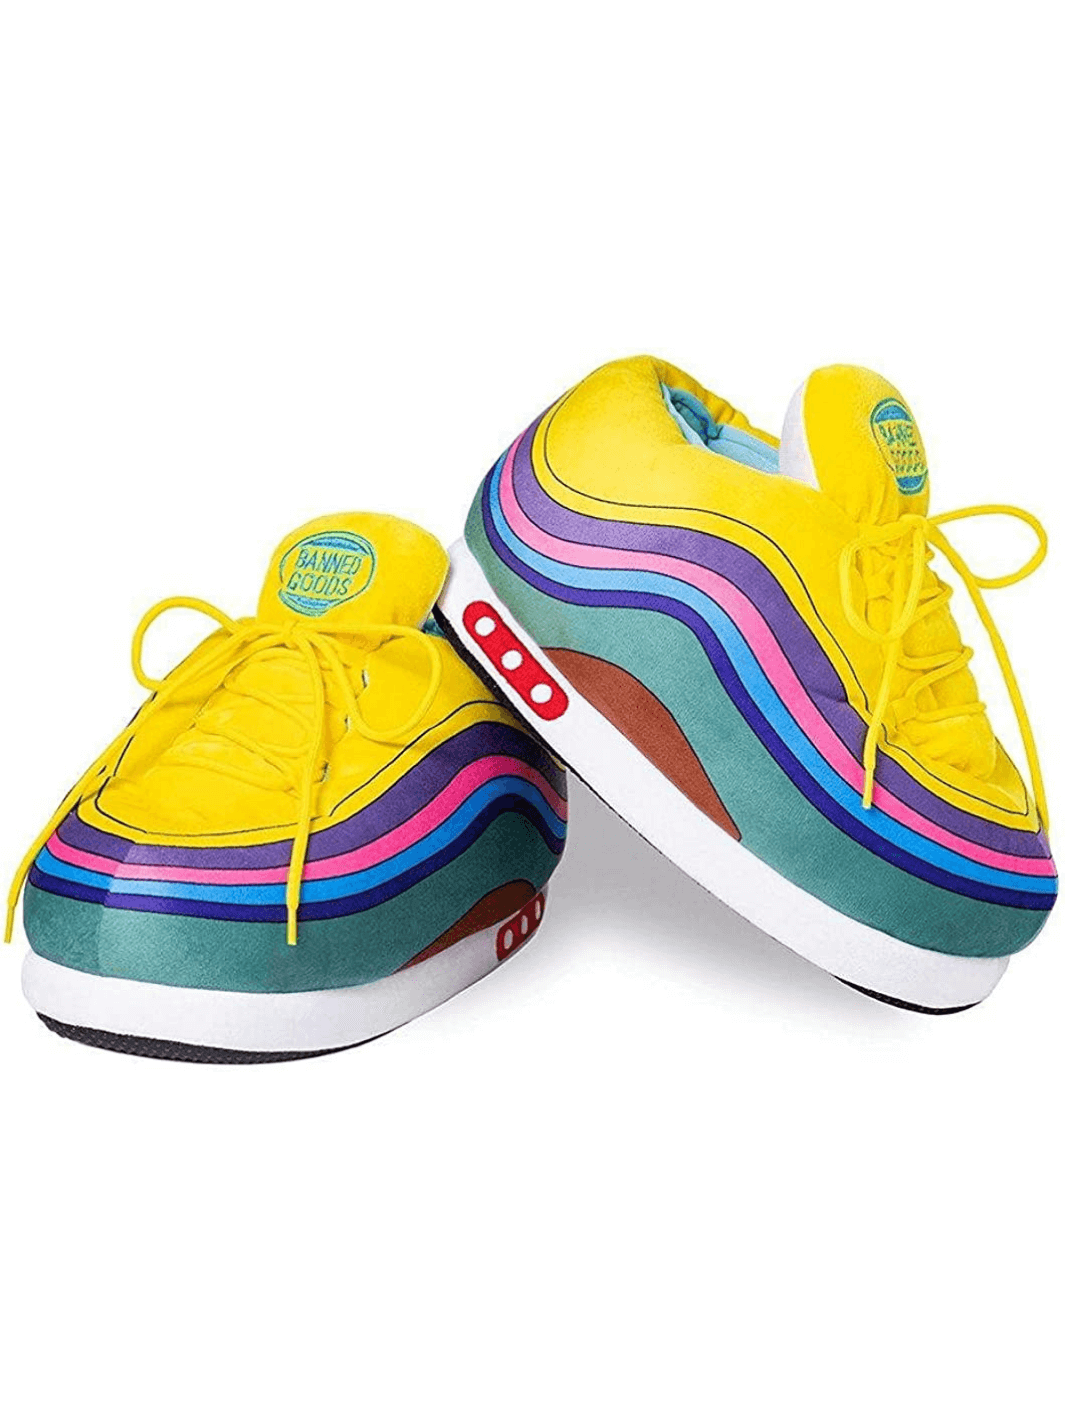 RAINBOW PUFF - Puffsneakers RAINBOW PUFF puffsneakers Puffsneakers  899.00 